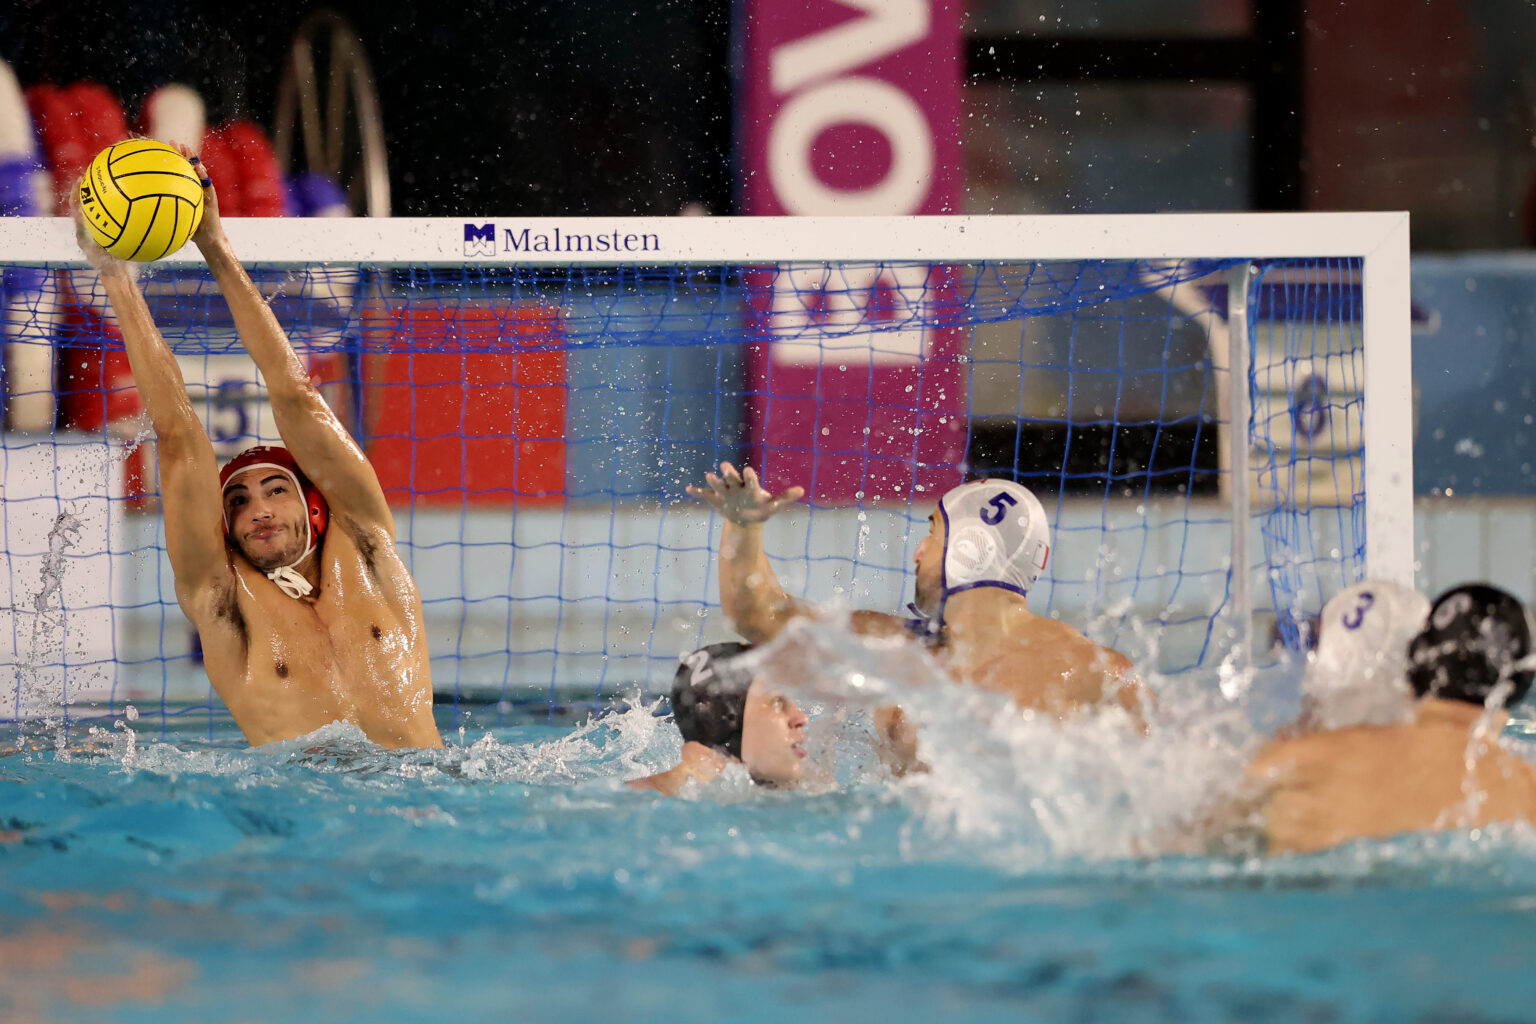 IMAGO / Domenic Aquilina, Malta national team water polo goalkeeper Jake Tanti dives to his right to parry the ball